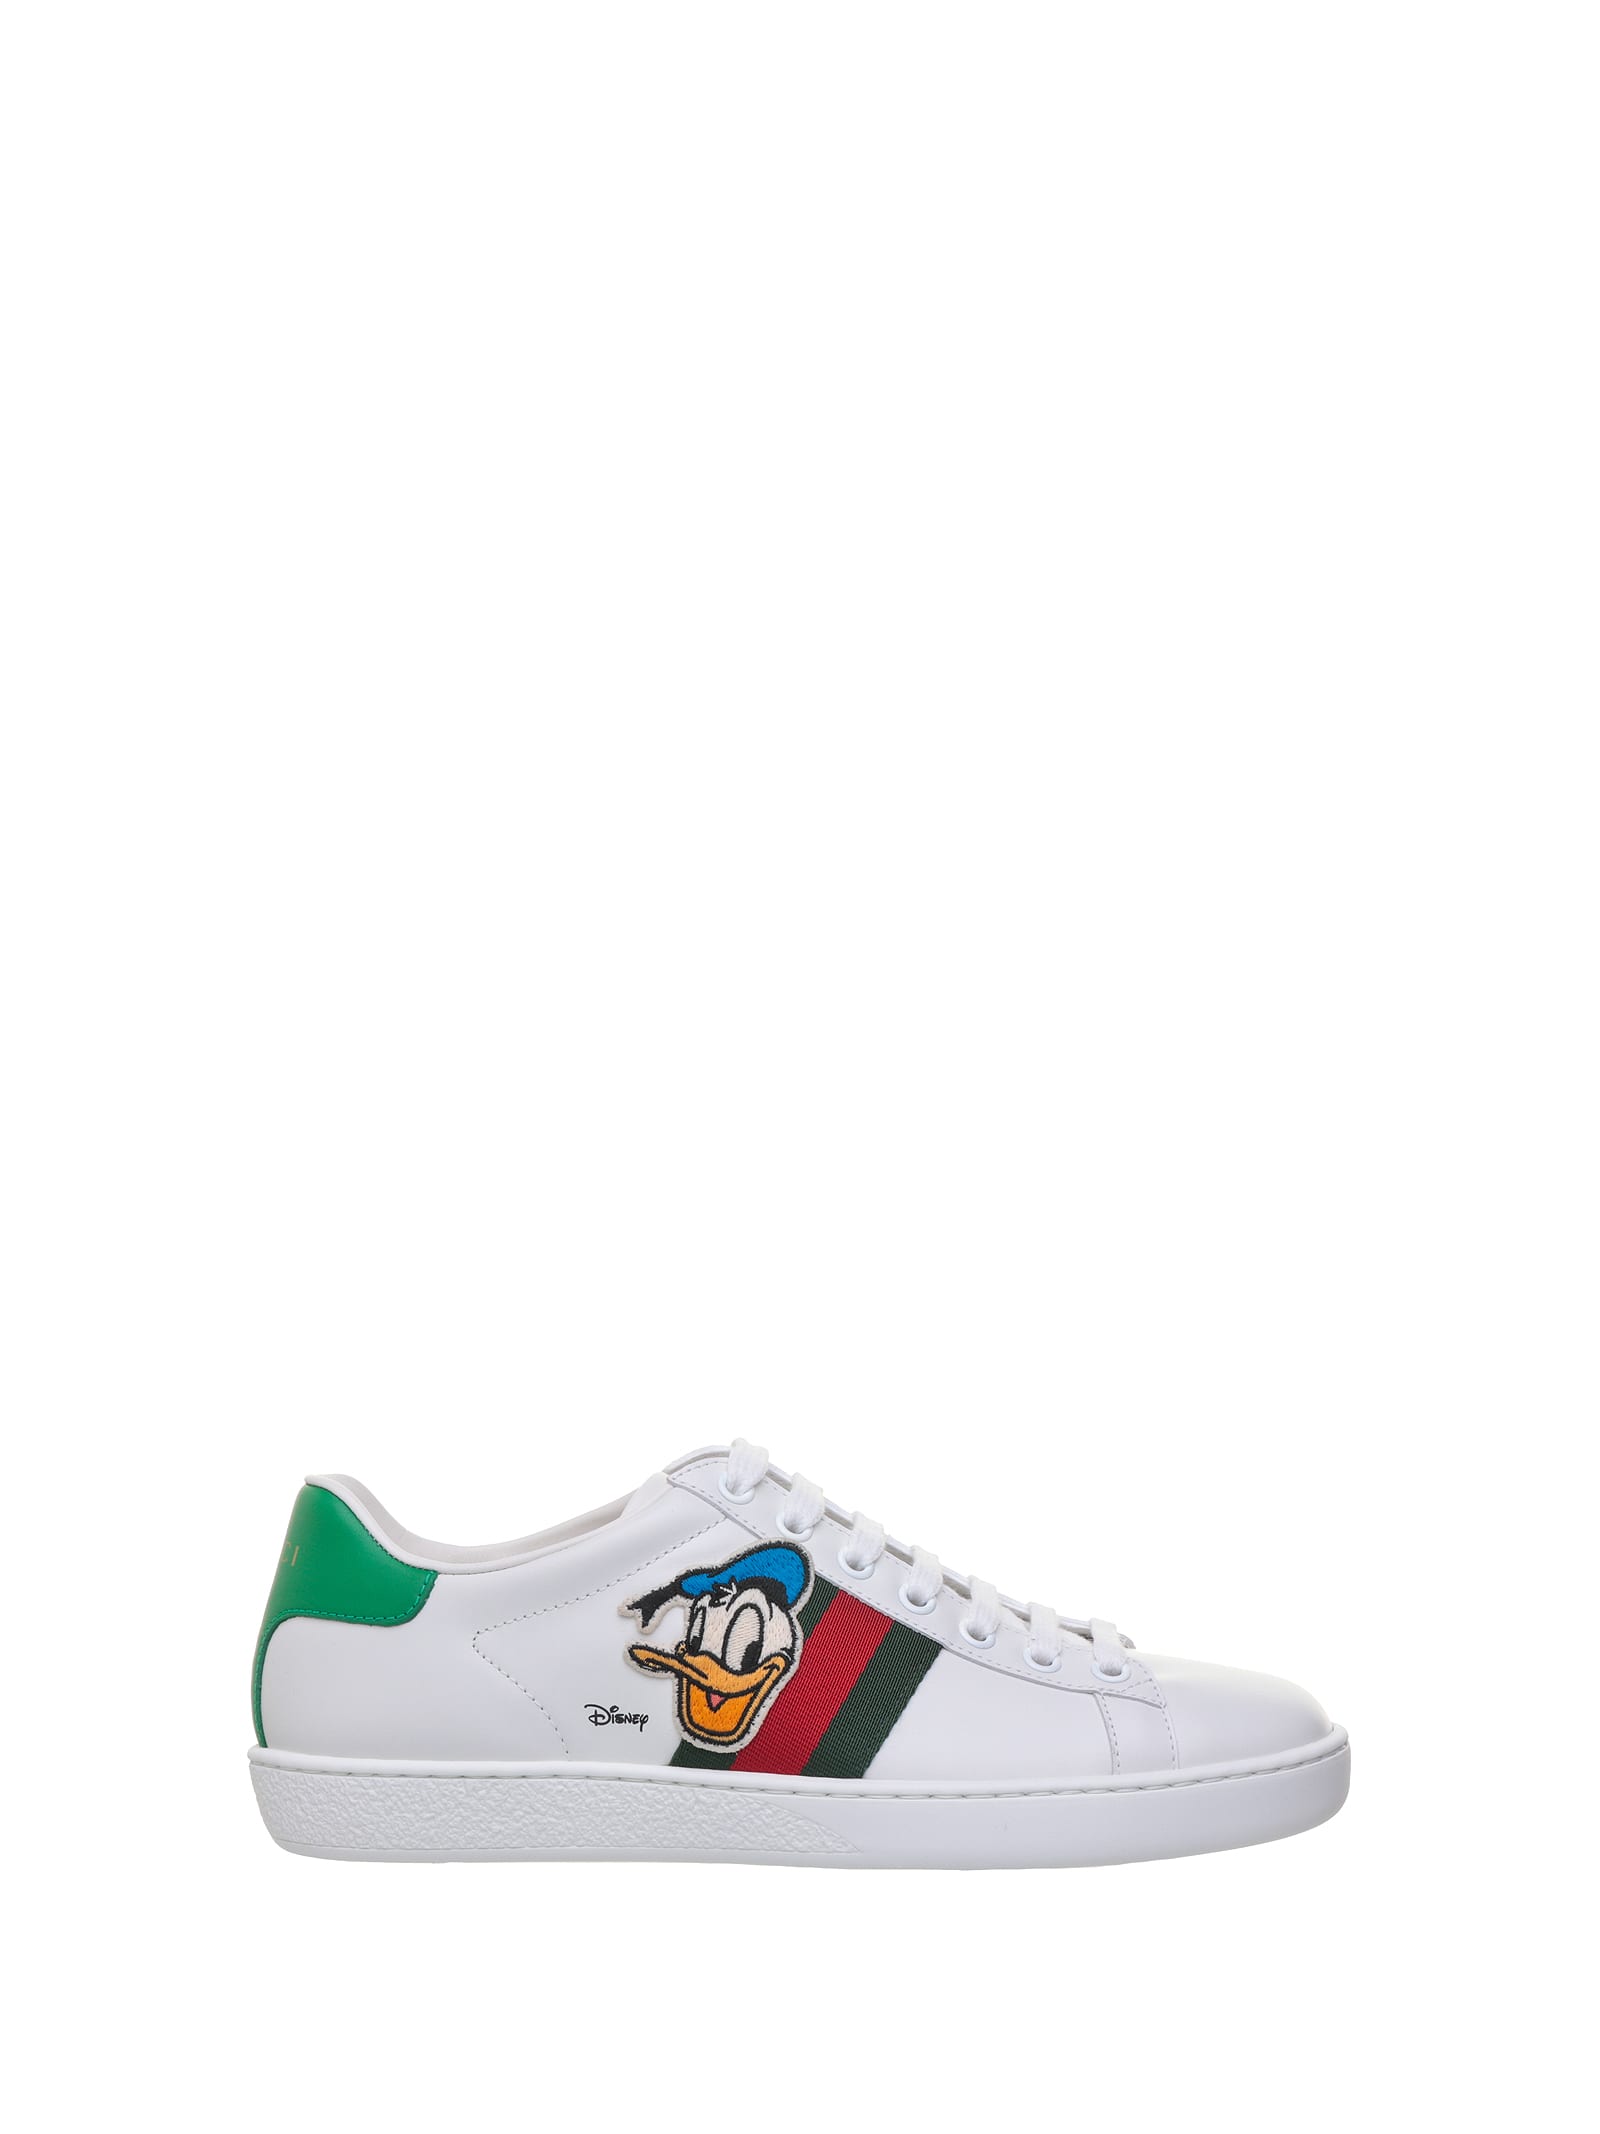 Buy Gucci Donald Duck Disney X Gucci Ace Sneaker online, shop Gucci shoes with free shipping